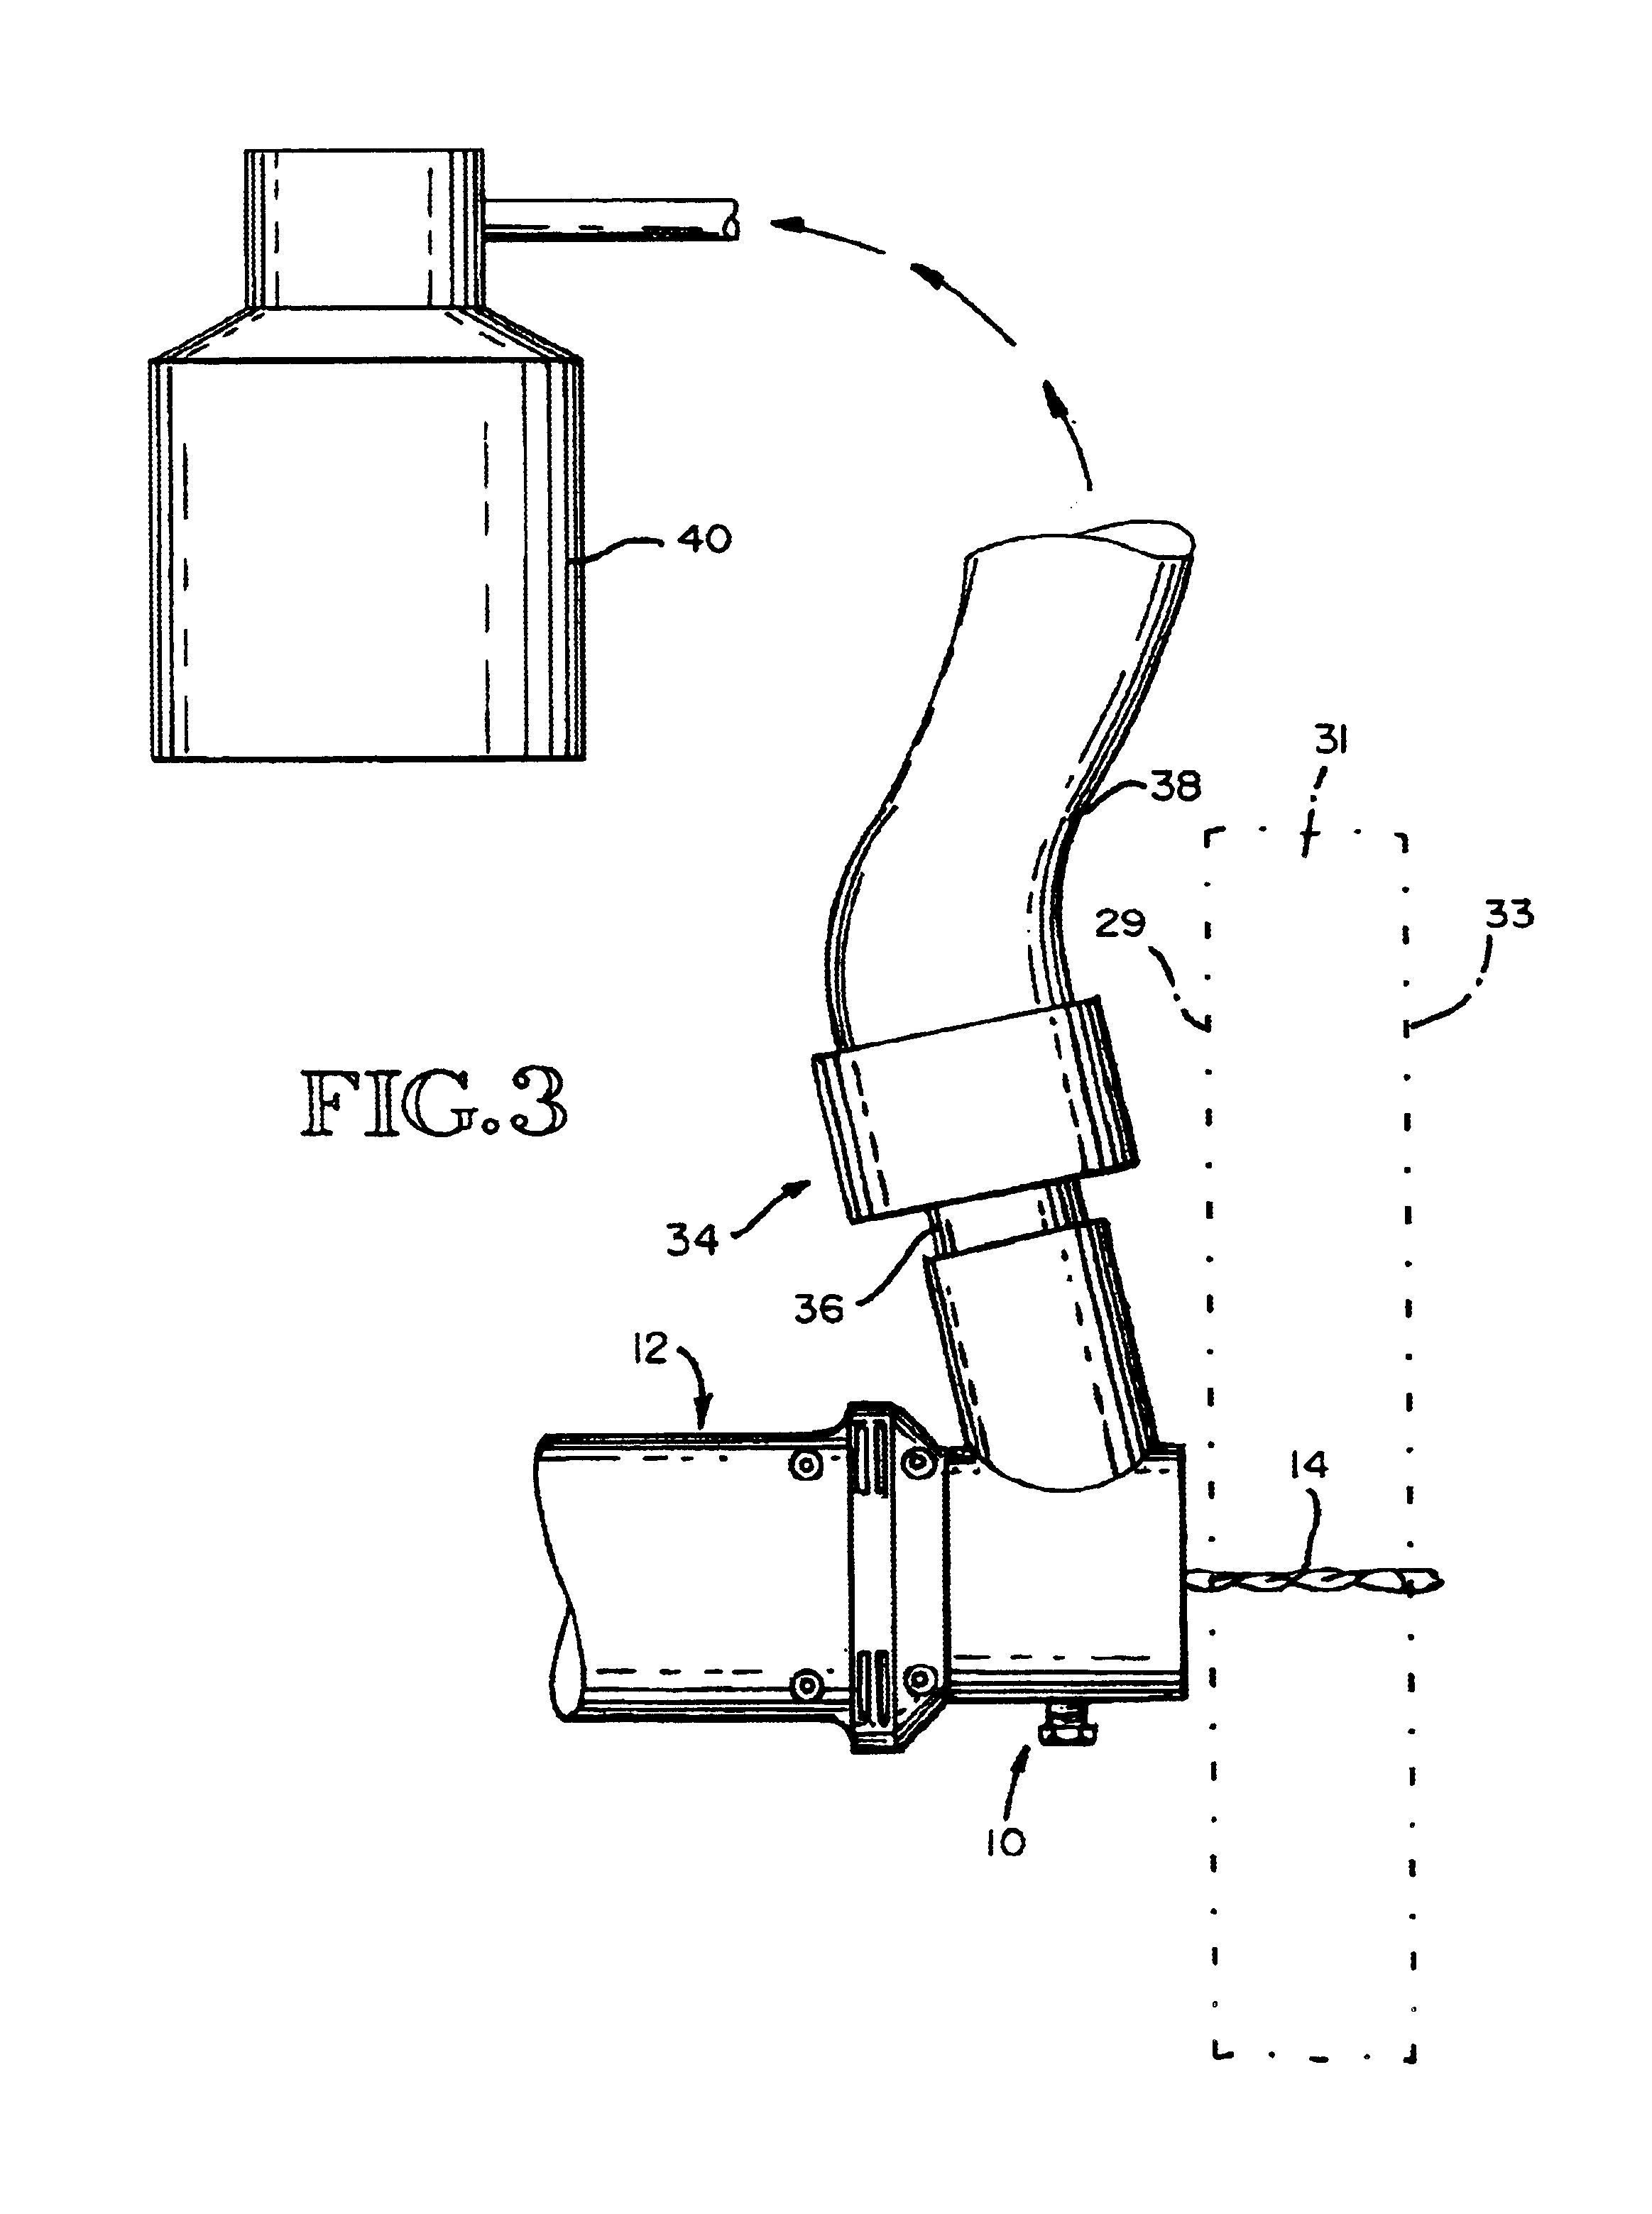 Dust collector attachment for a spiral power tool